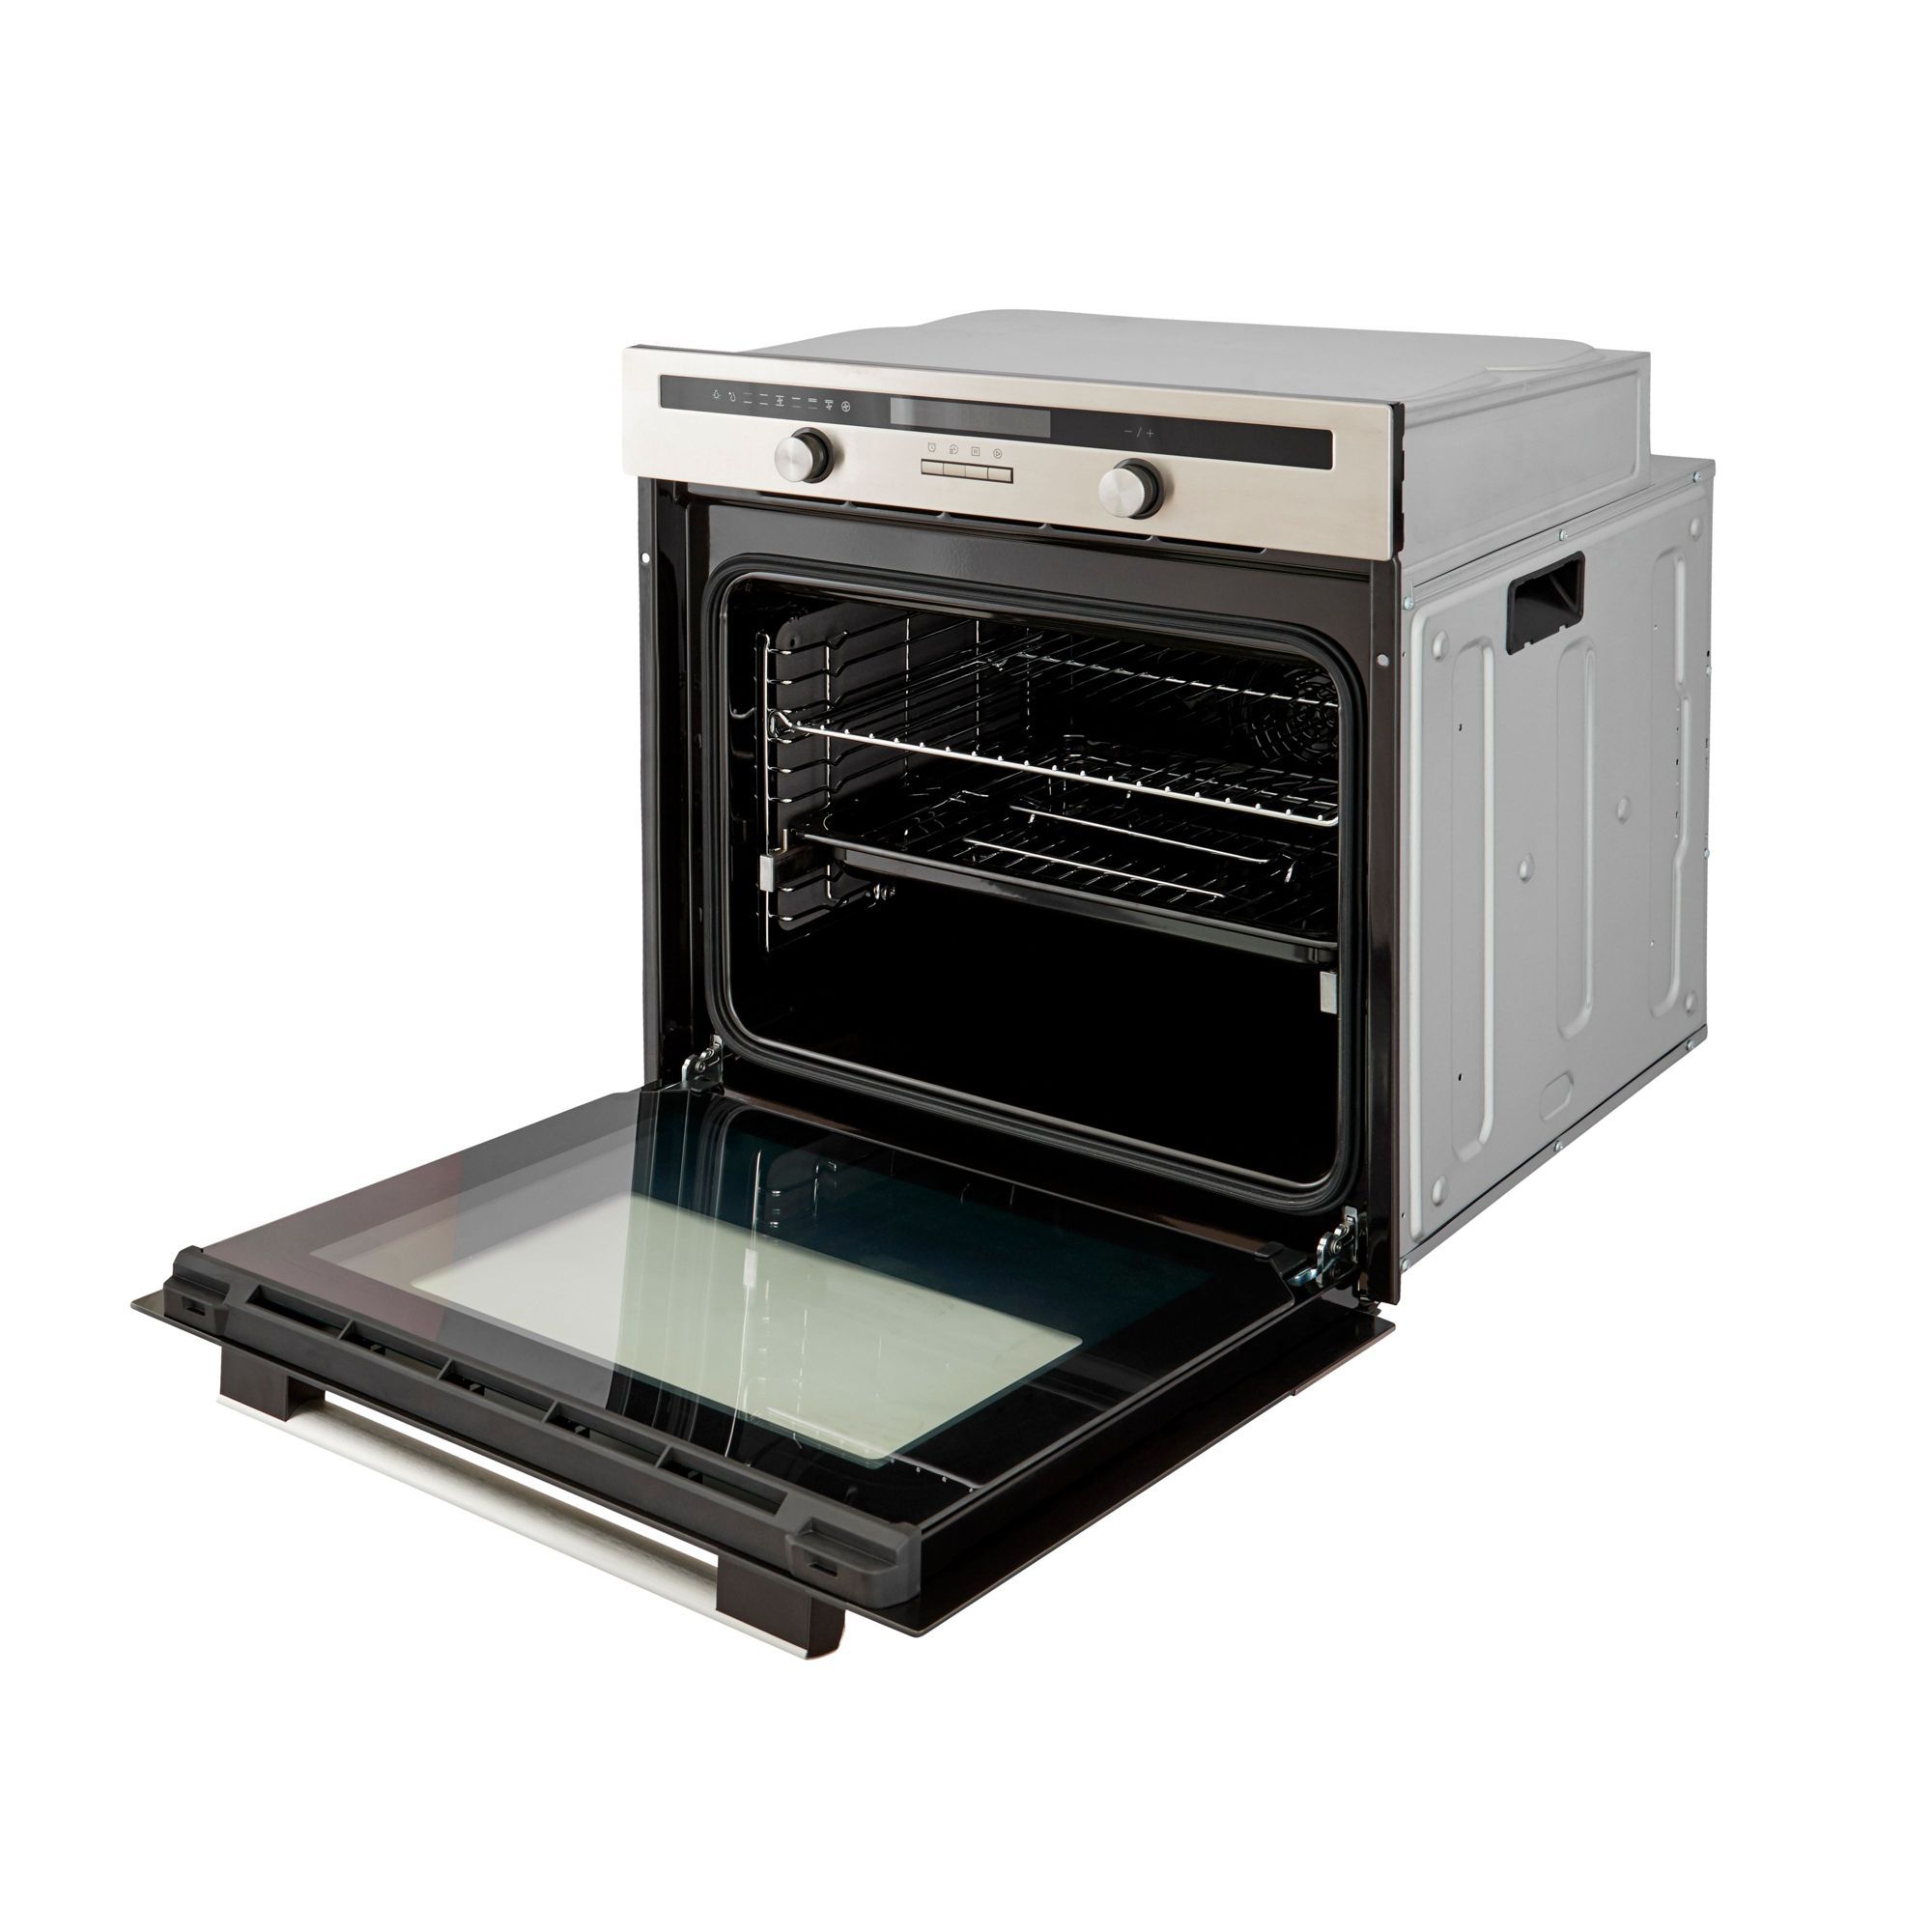 Cooke & Lewis CLMFSTa Built-in Single Multifunction Oven - Brushed black & grey stainless steel effect